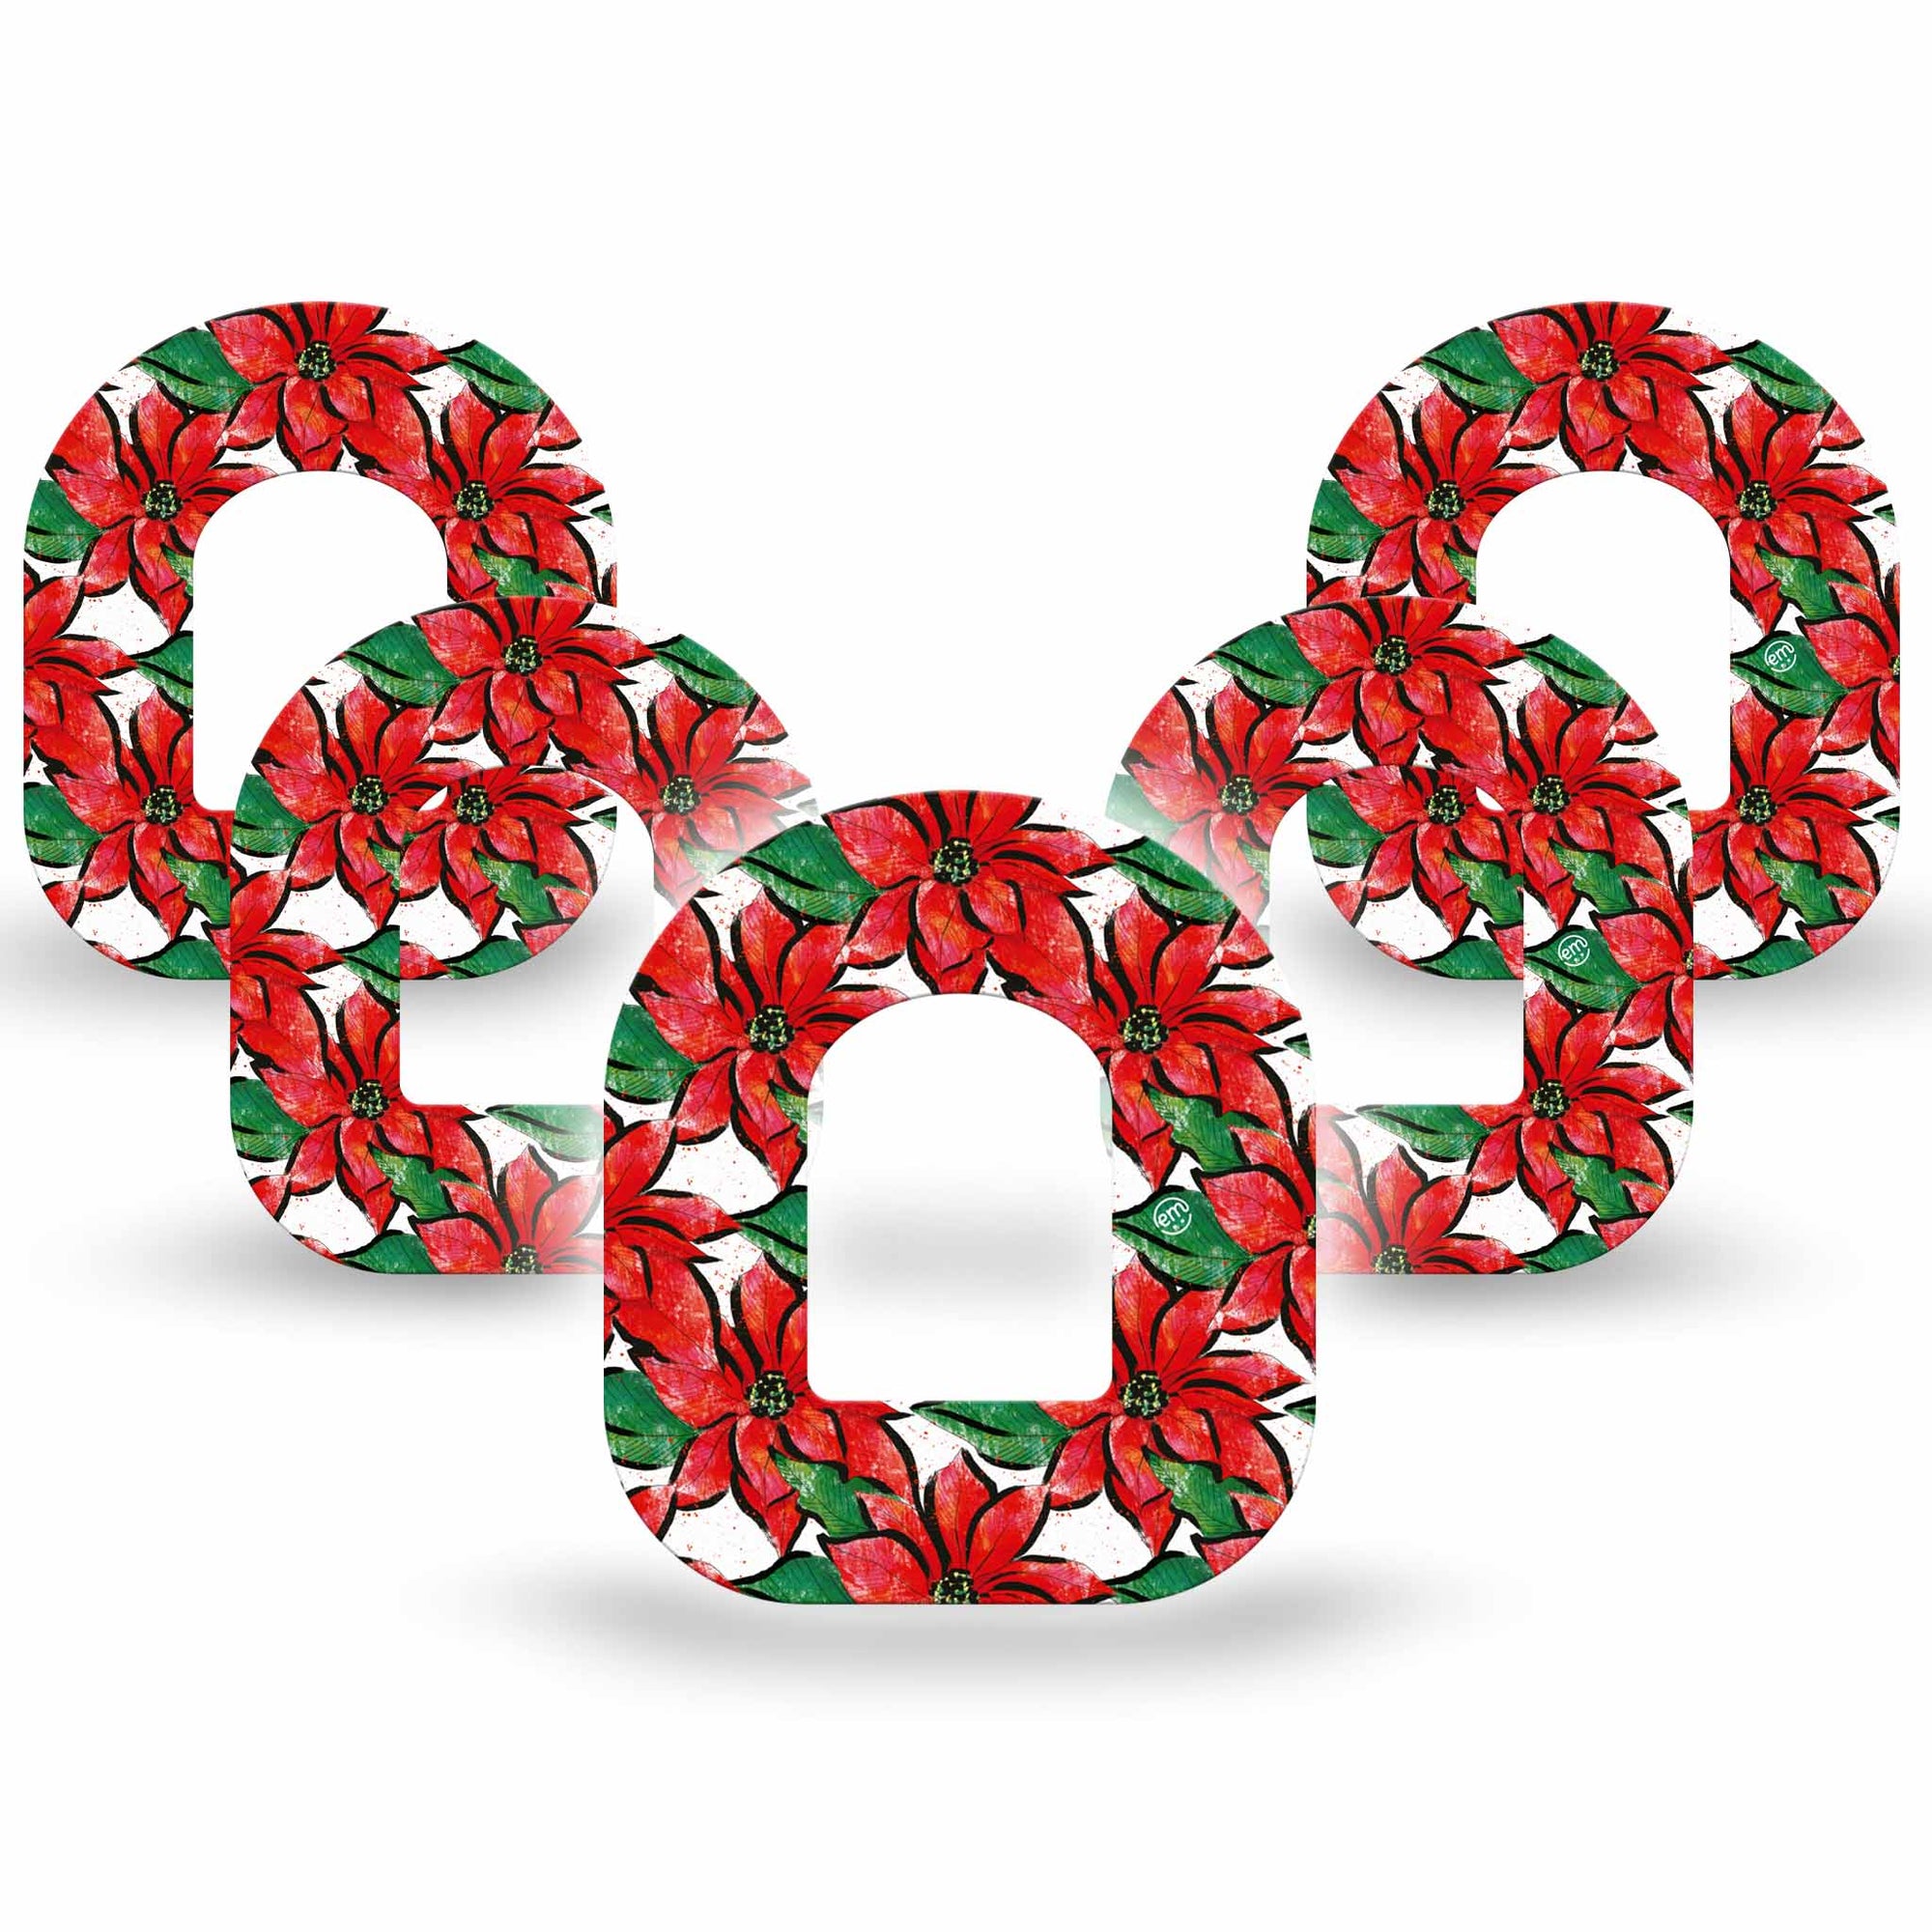 ExpressionMed Poinsettia Omnipod Patch, 5-Pack CGM Adhesive Tape, Holiday Themed Design